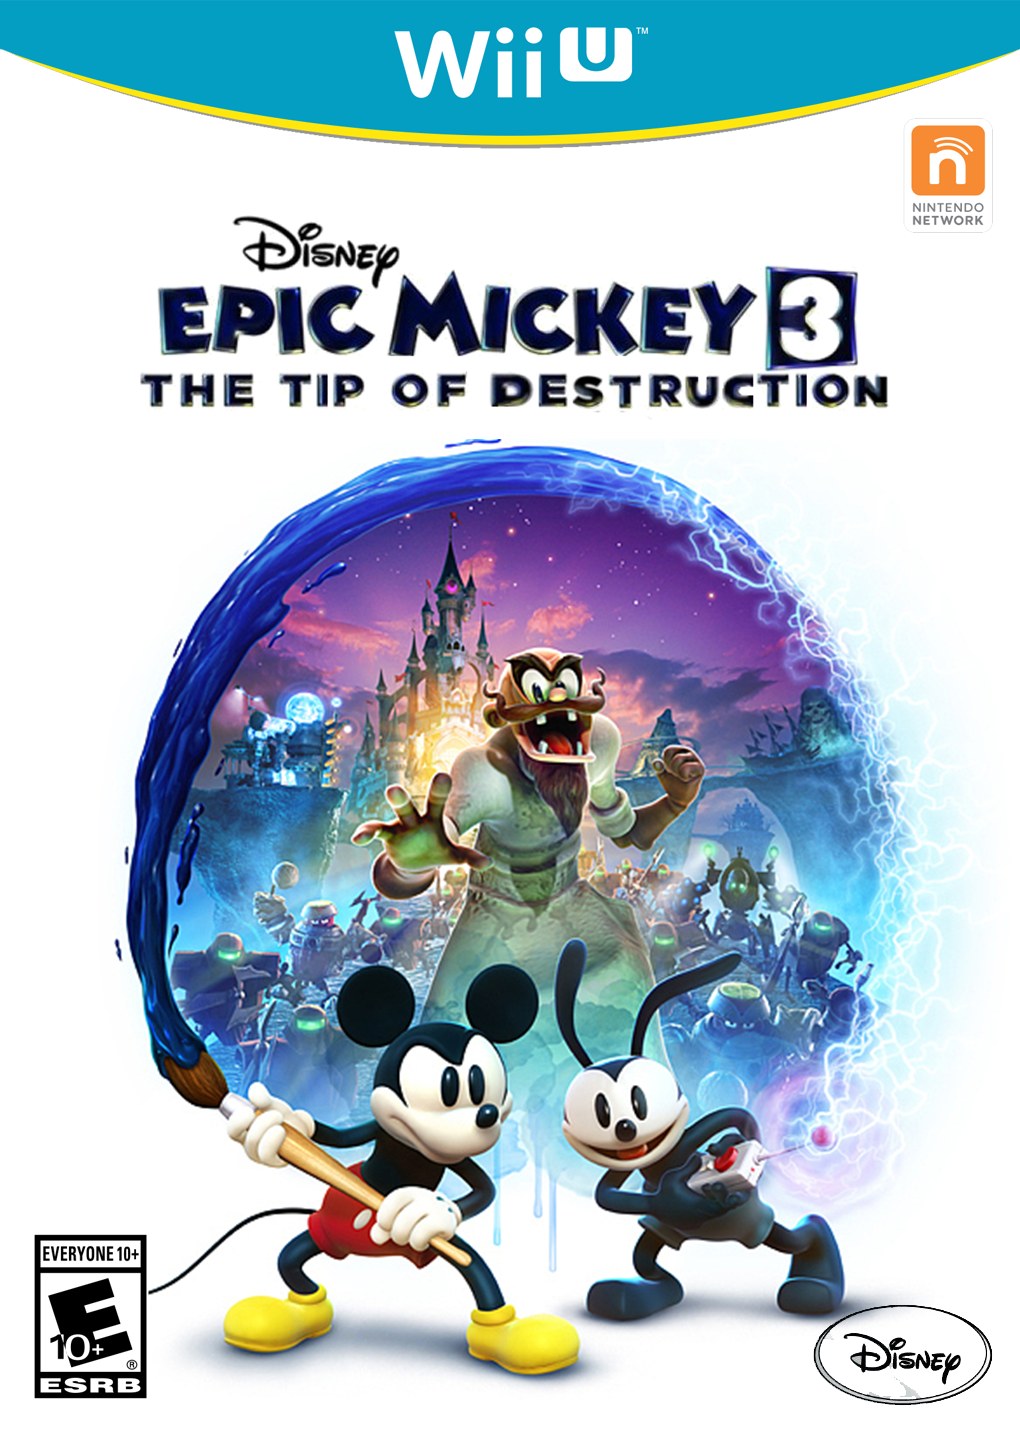 Epic Mickey 3 The Tip of Destruction - Front box cover